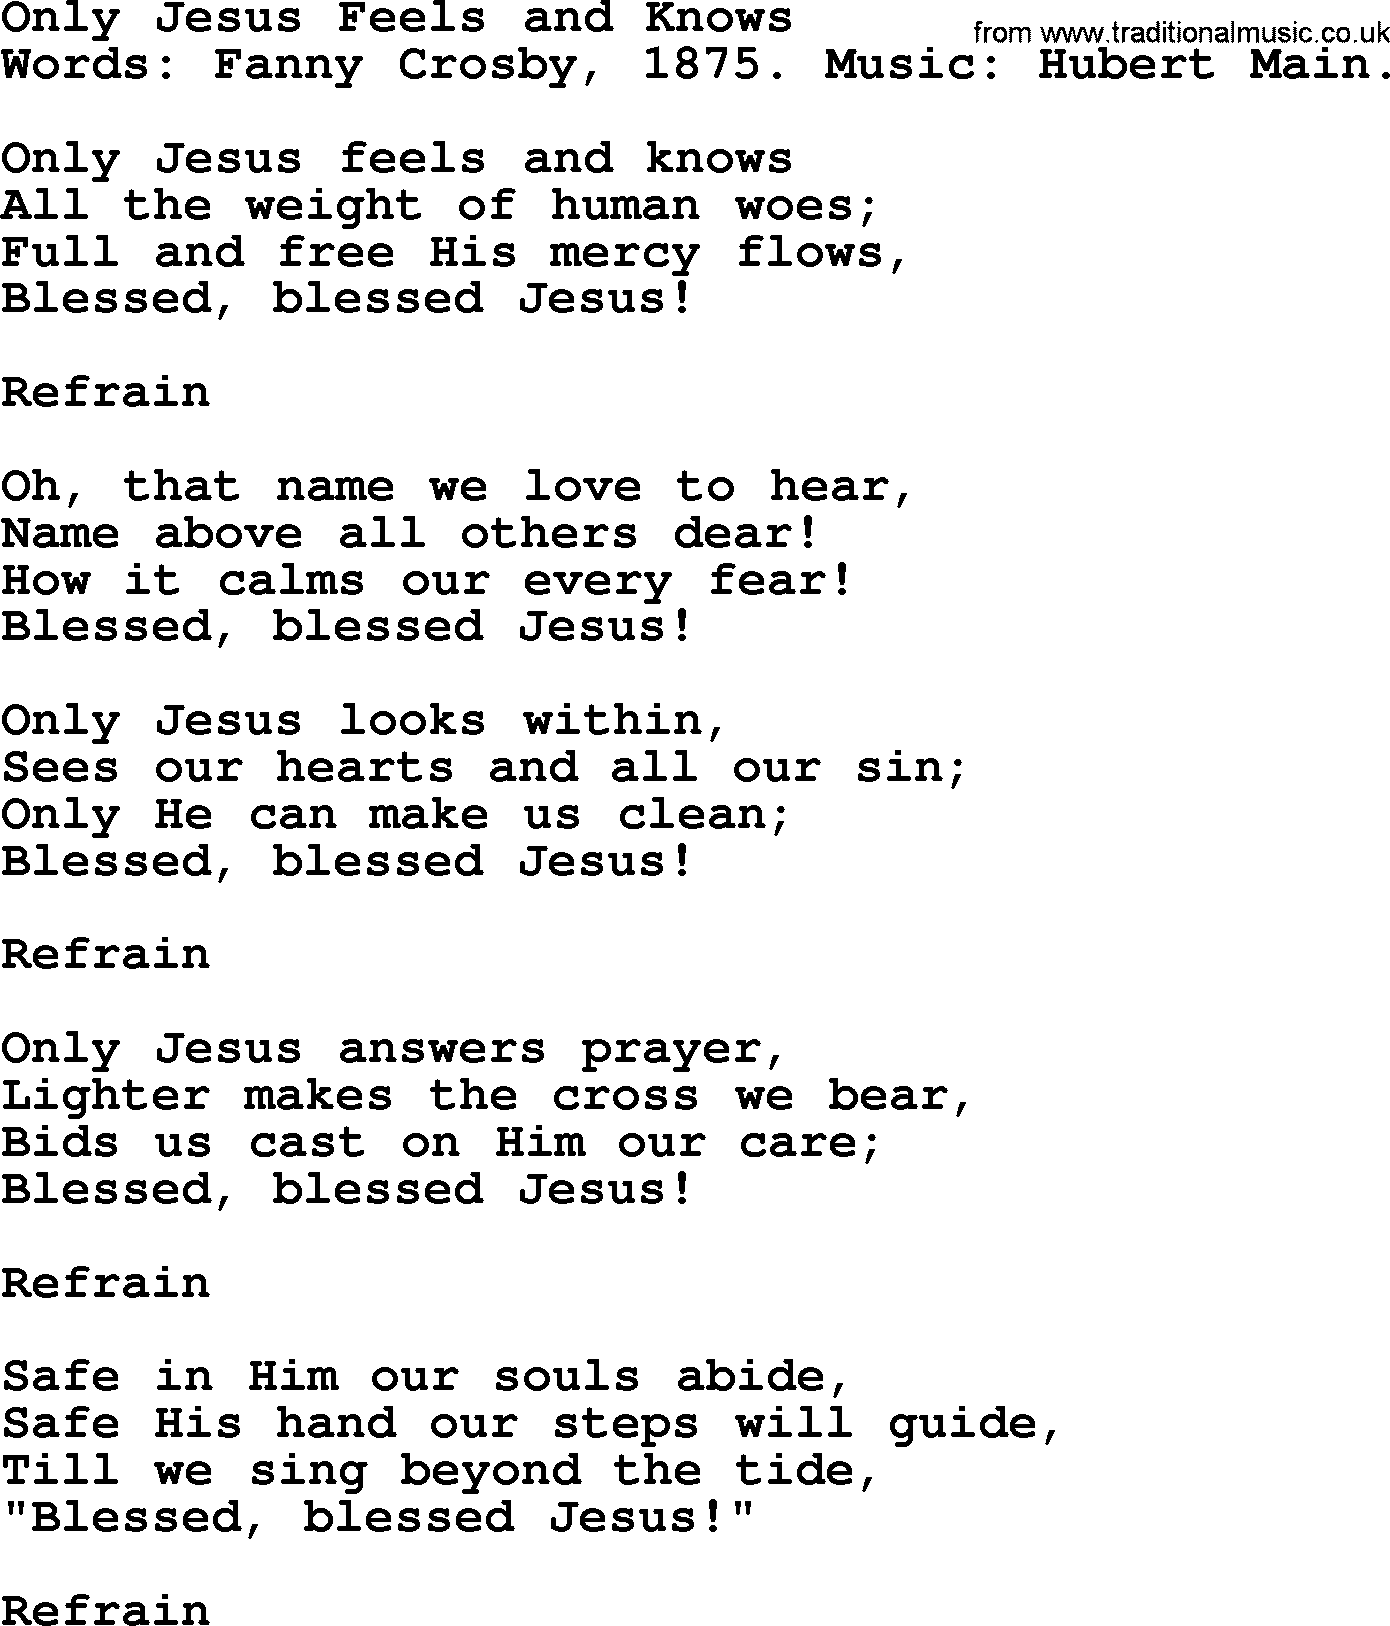 Fanny Crosby song: Only Jesus Feels And Knows, lyrics